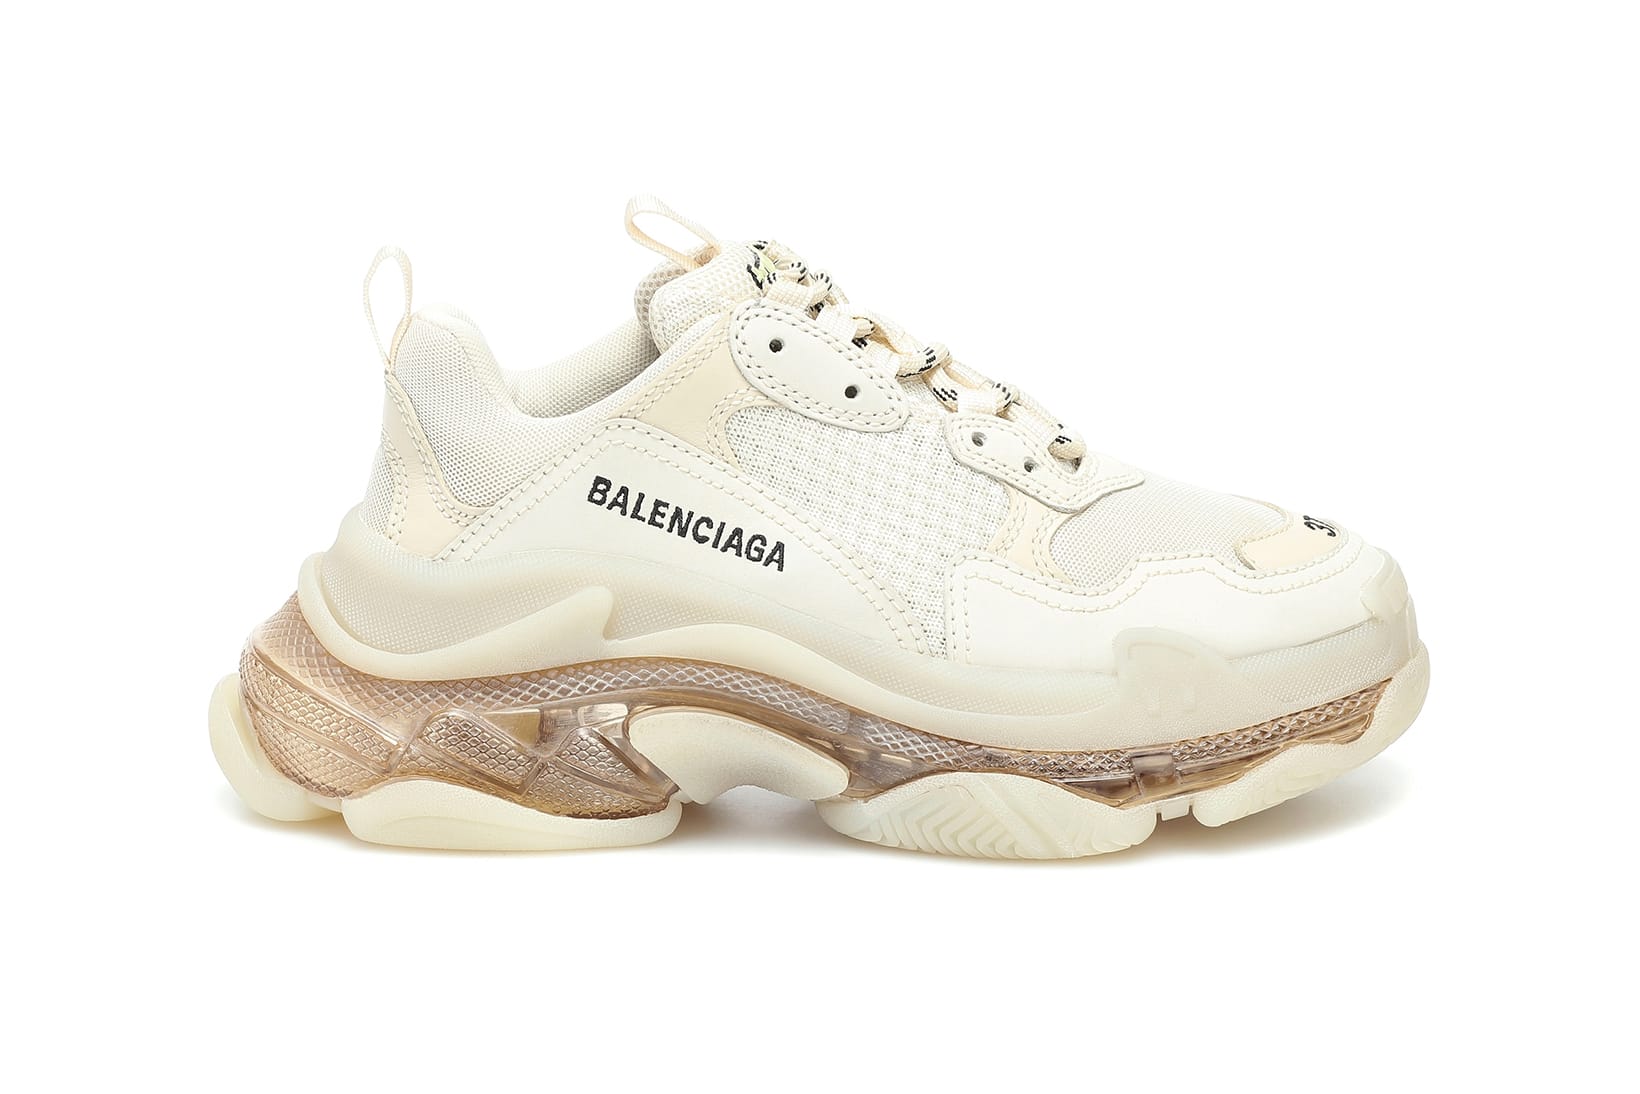 Real vs fake balenciaga triple s sneakers in white detail and